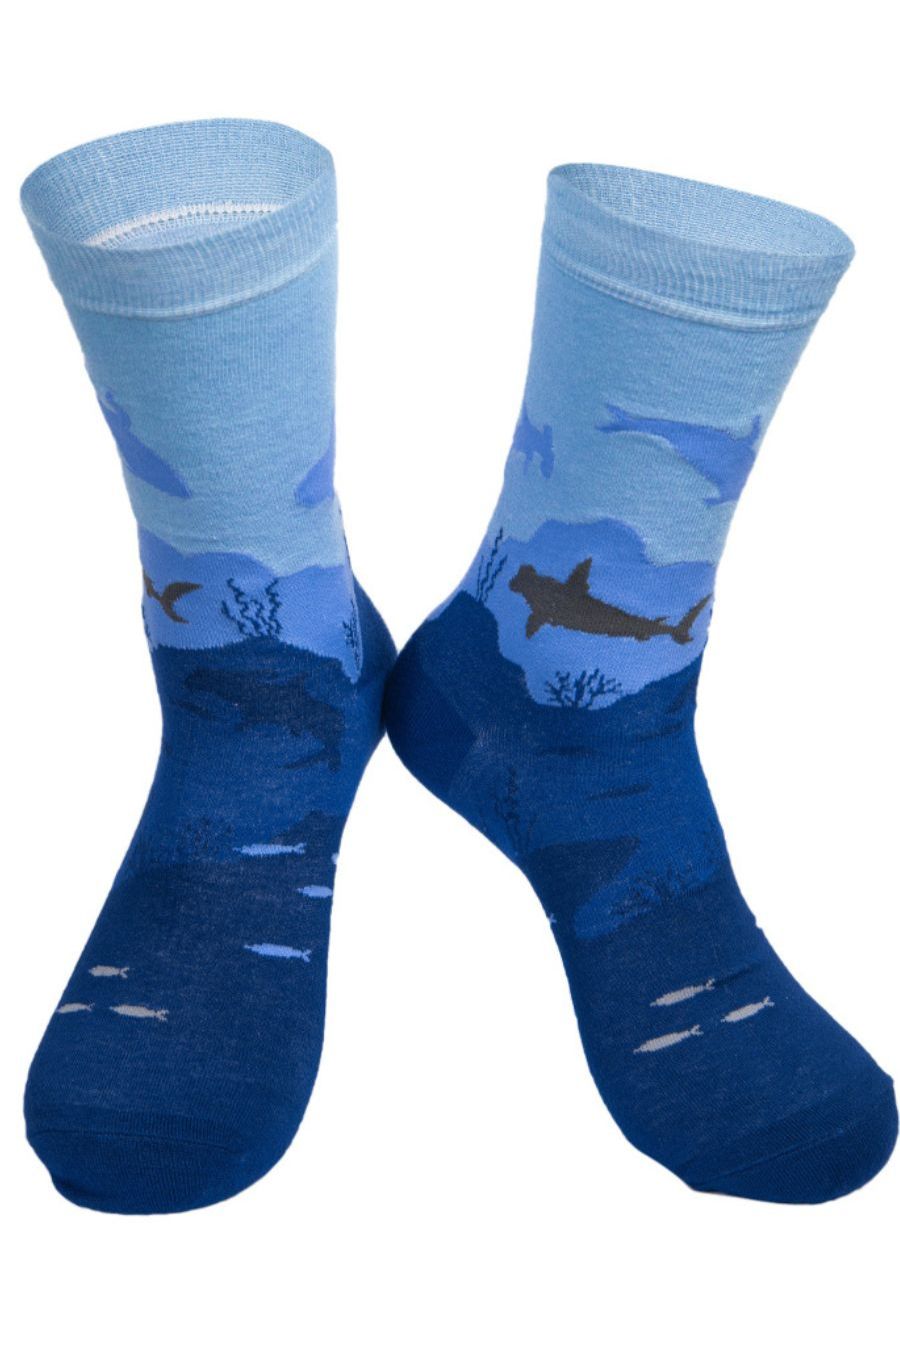 men's bamboo dress socks artistically designed to look like an underwater scene, with fish, hammerhead sharks and plants